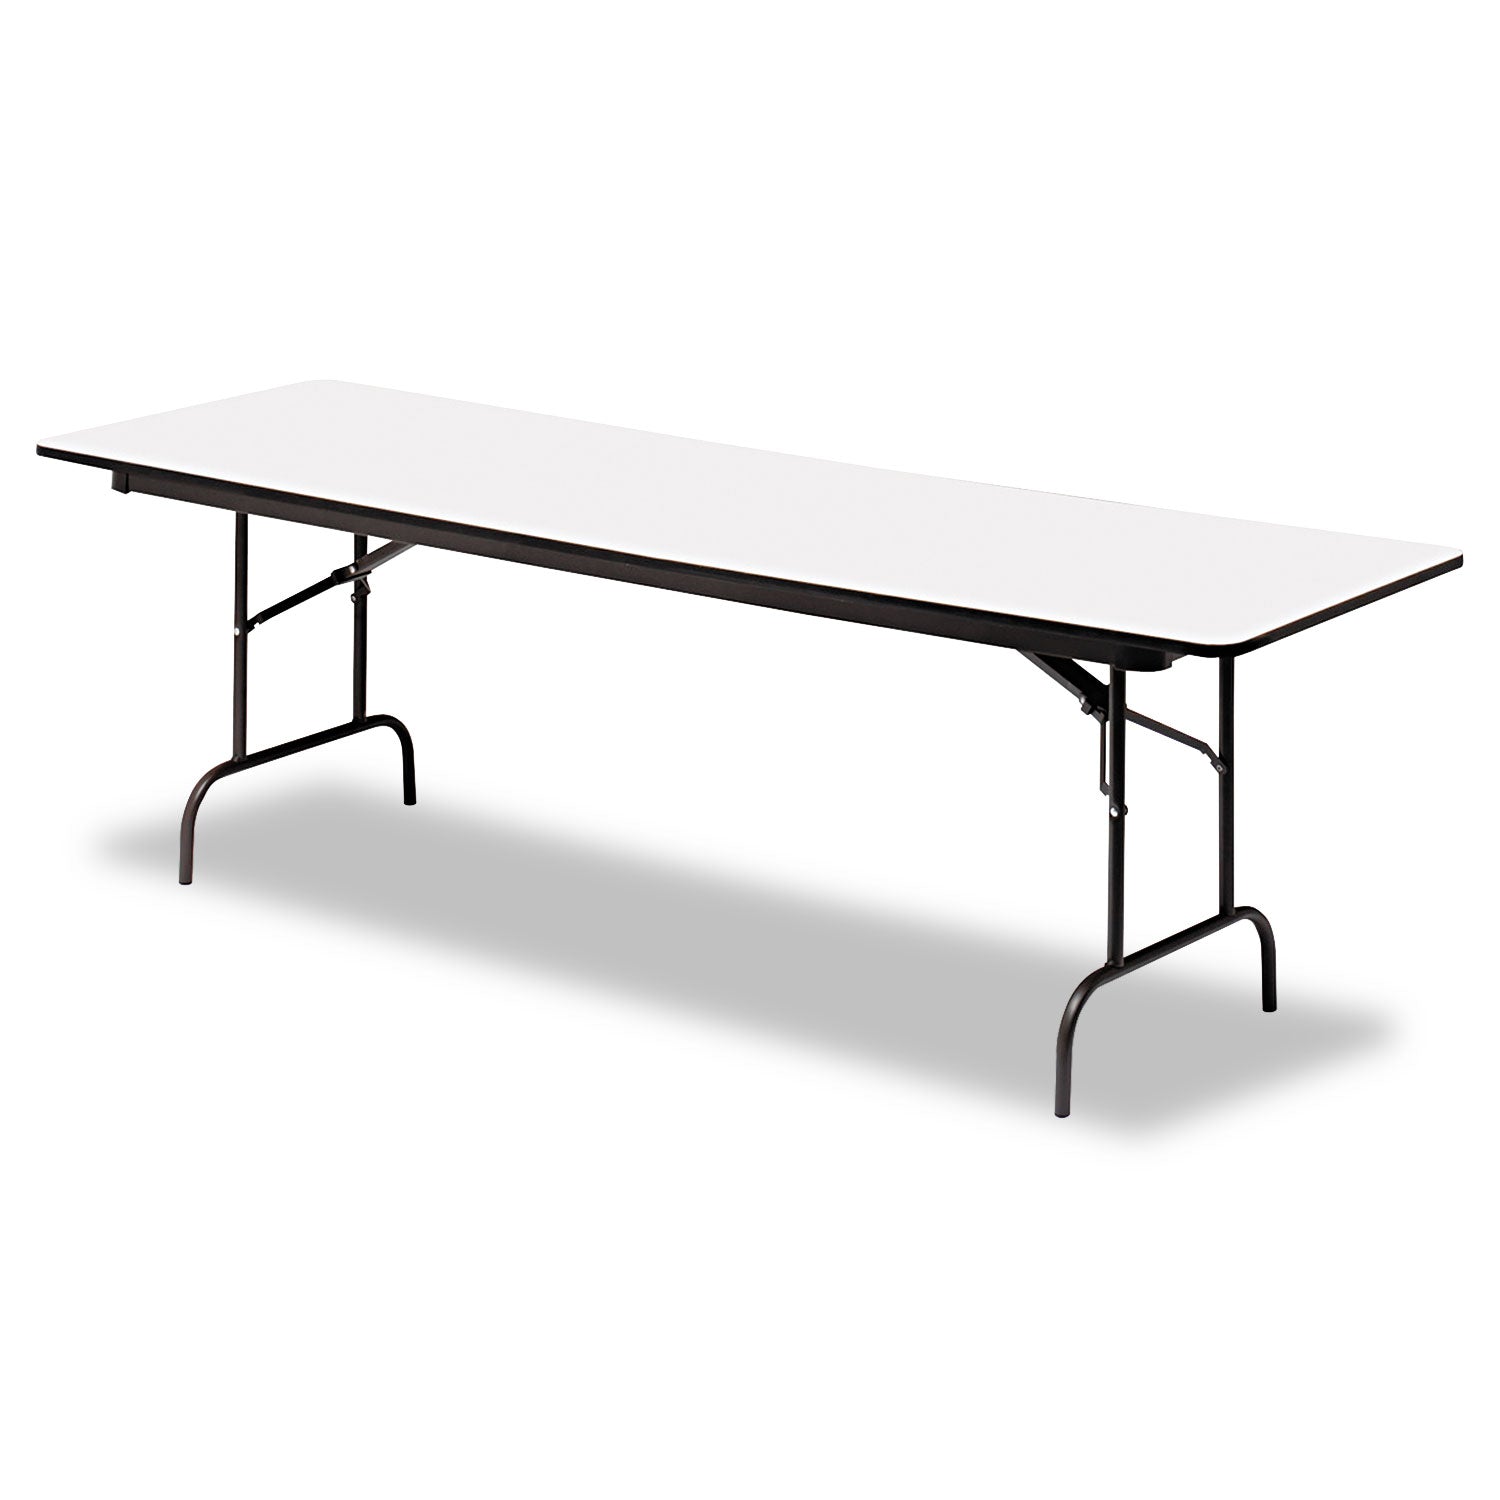 OfficeWorks Commercial Wood-Laminate Folding Table, Rectangular, 96" x 30" x 29", Gray/Charcoal - 